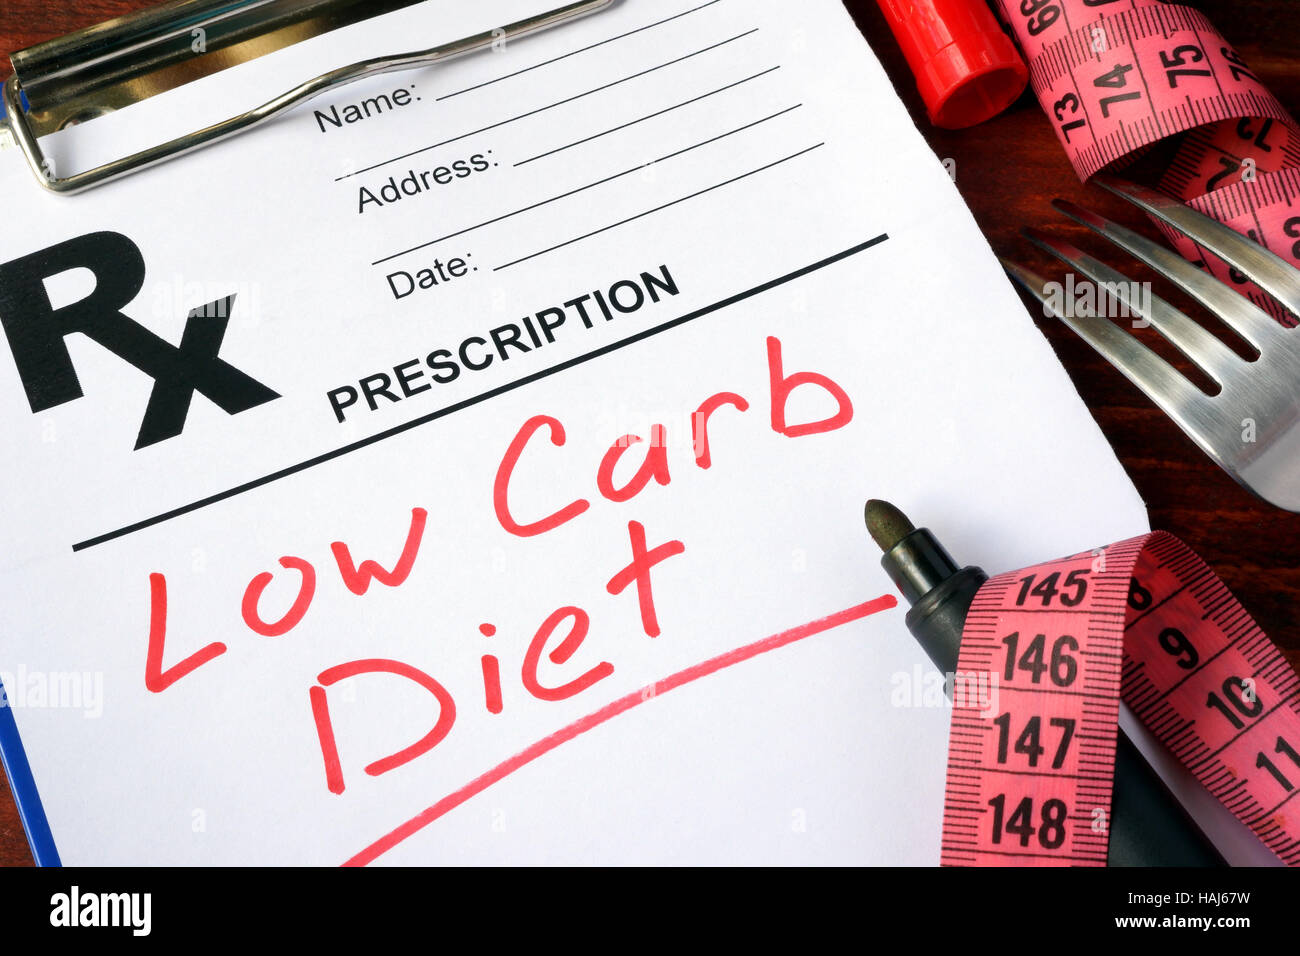 Prescription form with words low carb diet. Stock Photo